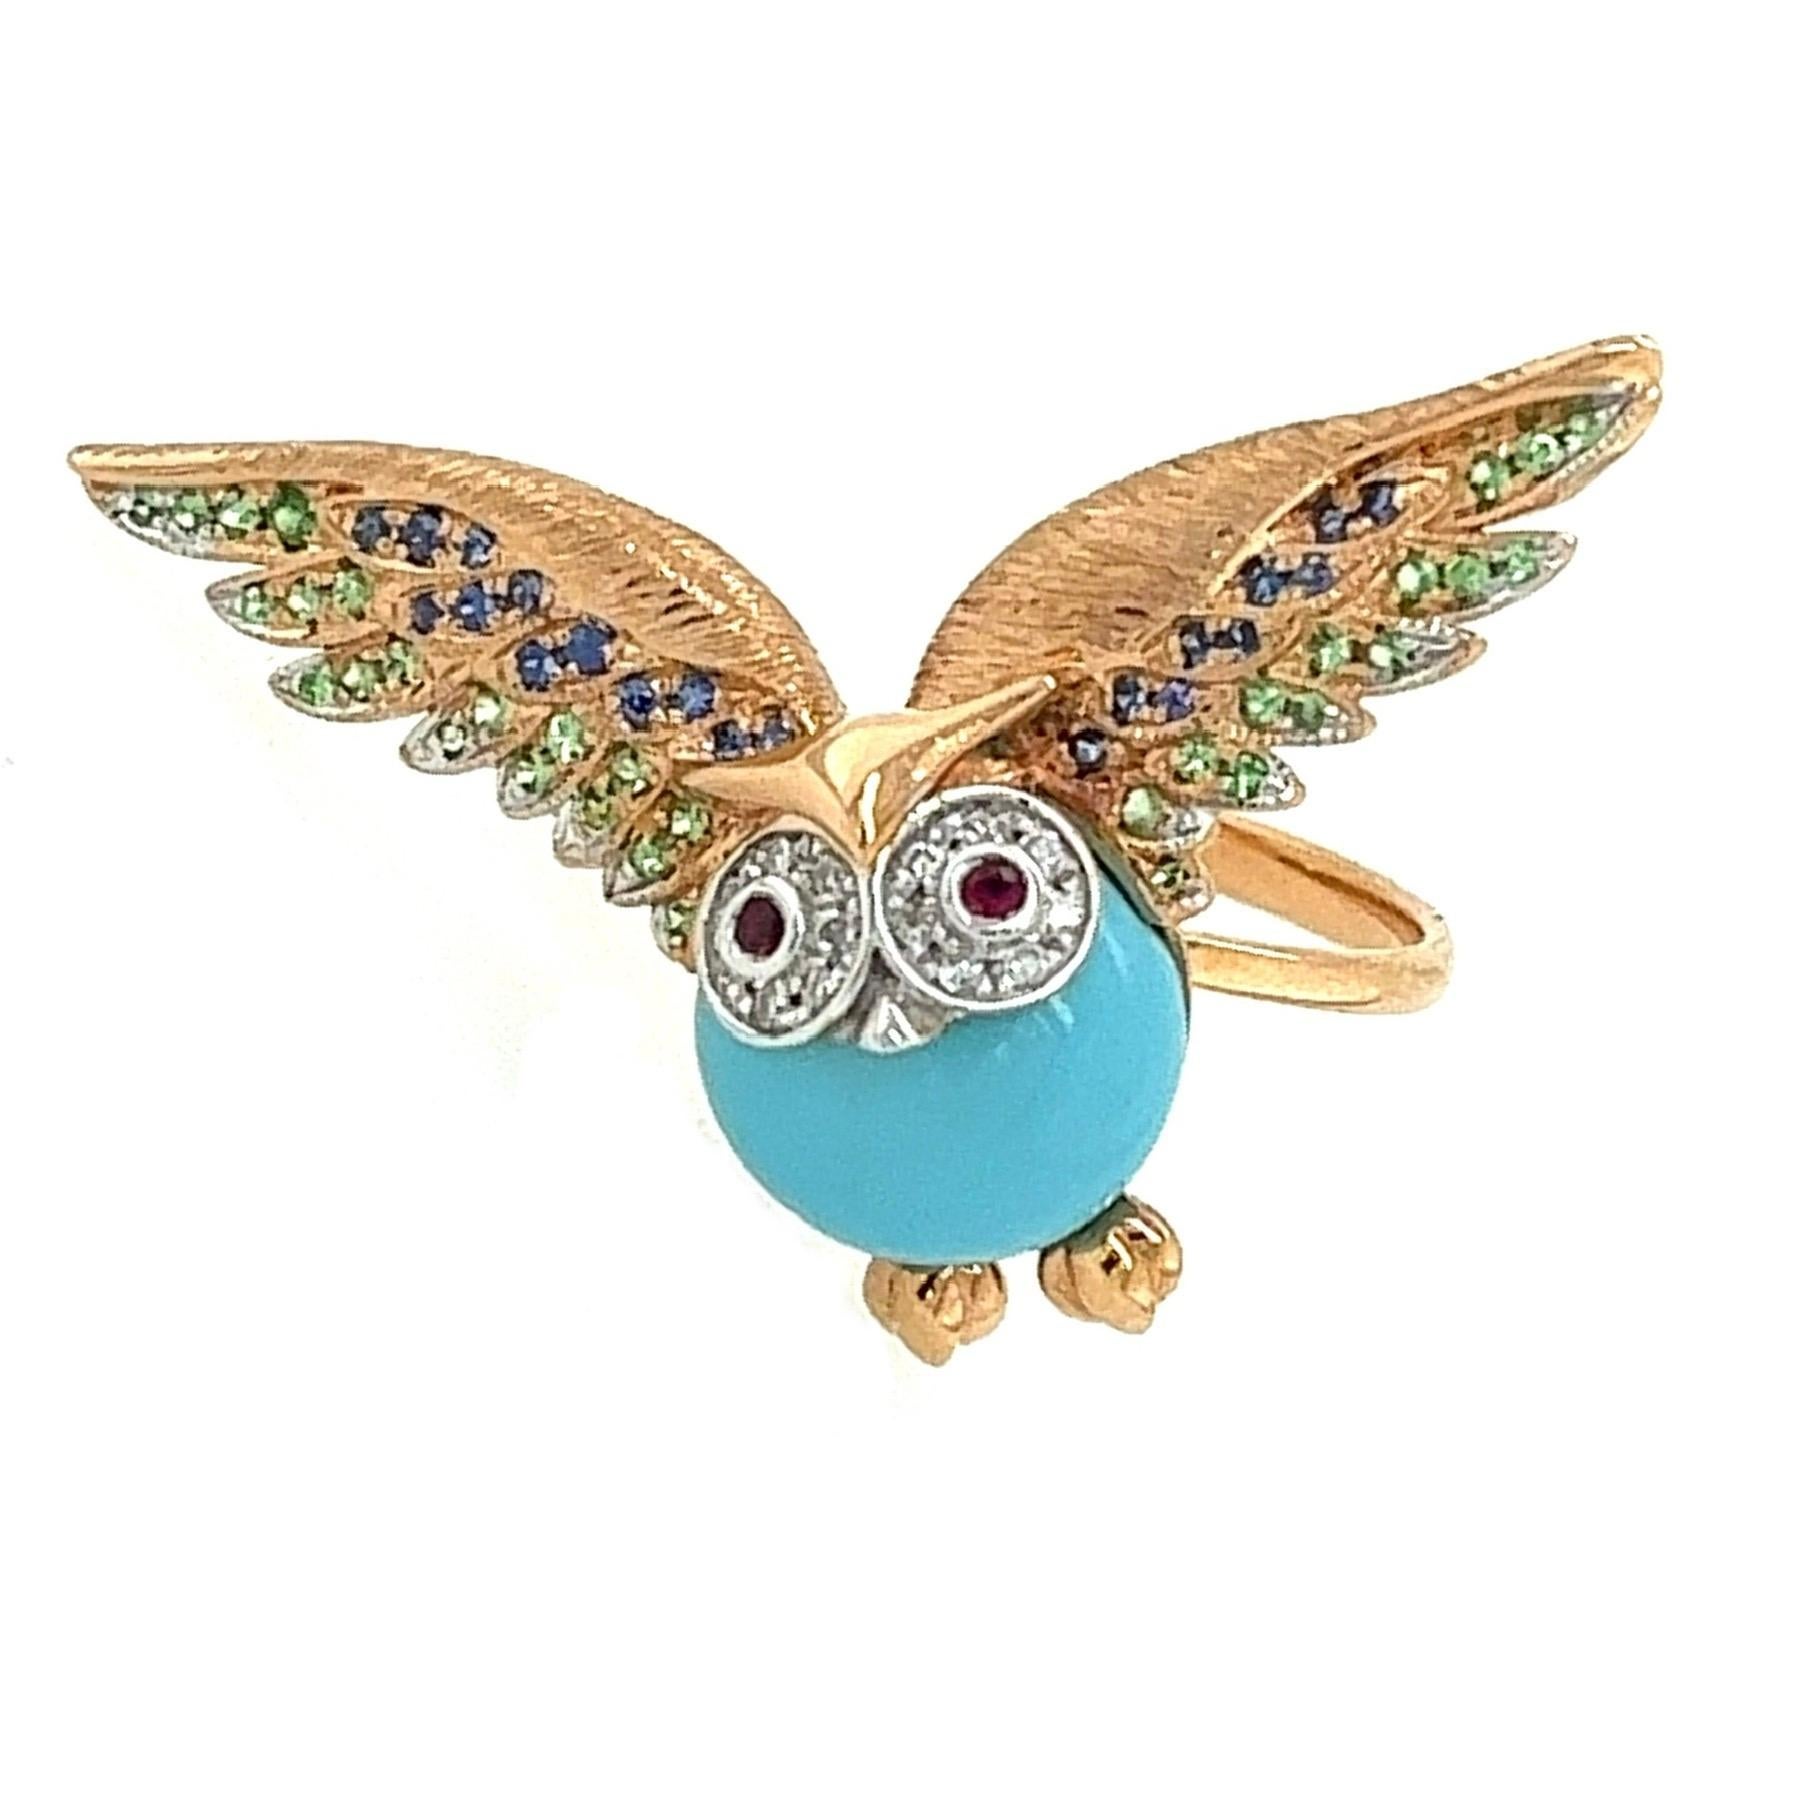 Modern 18K Gemstone Turquoise Owl Ring with Sapphires & Rubies